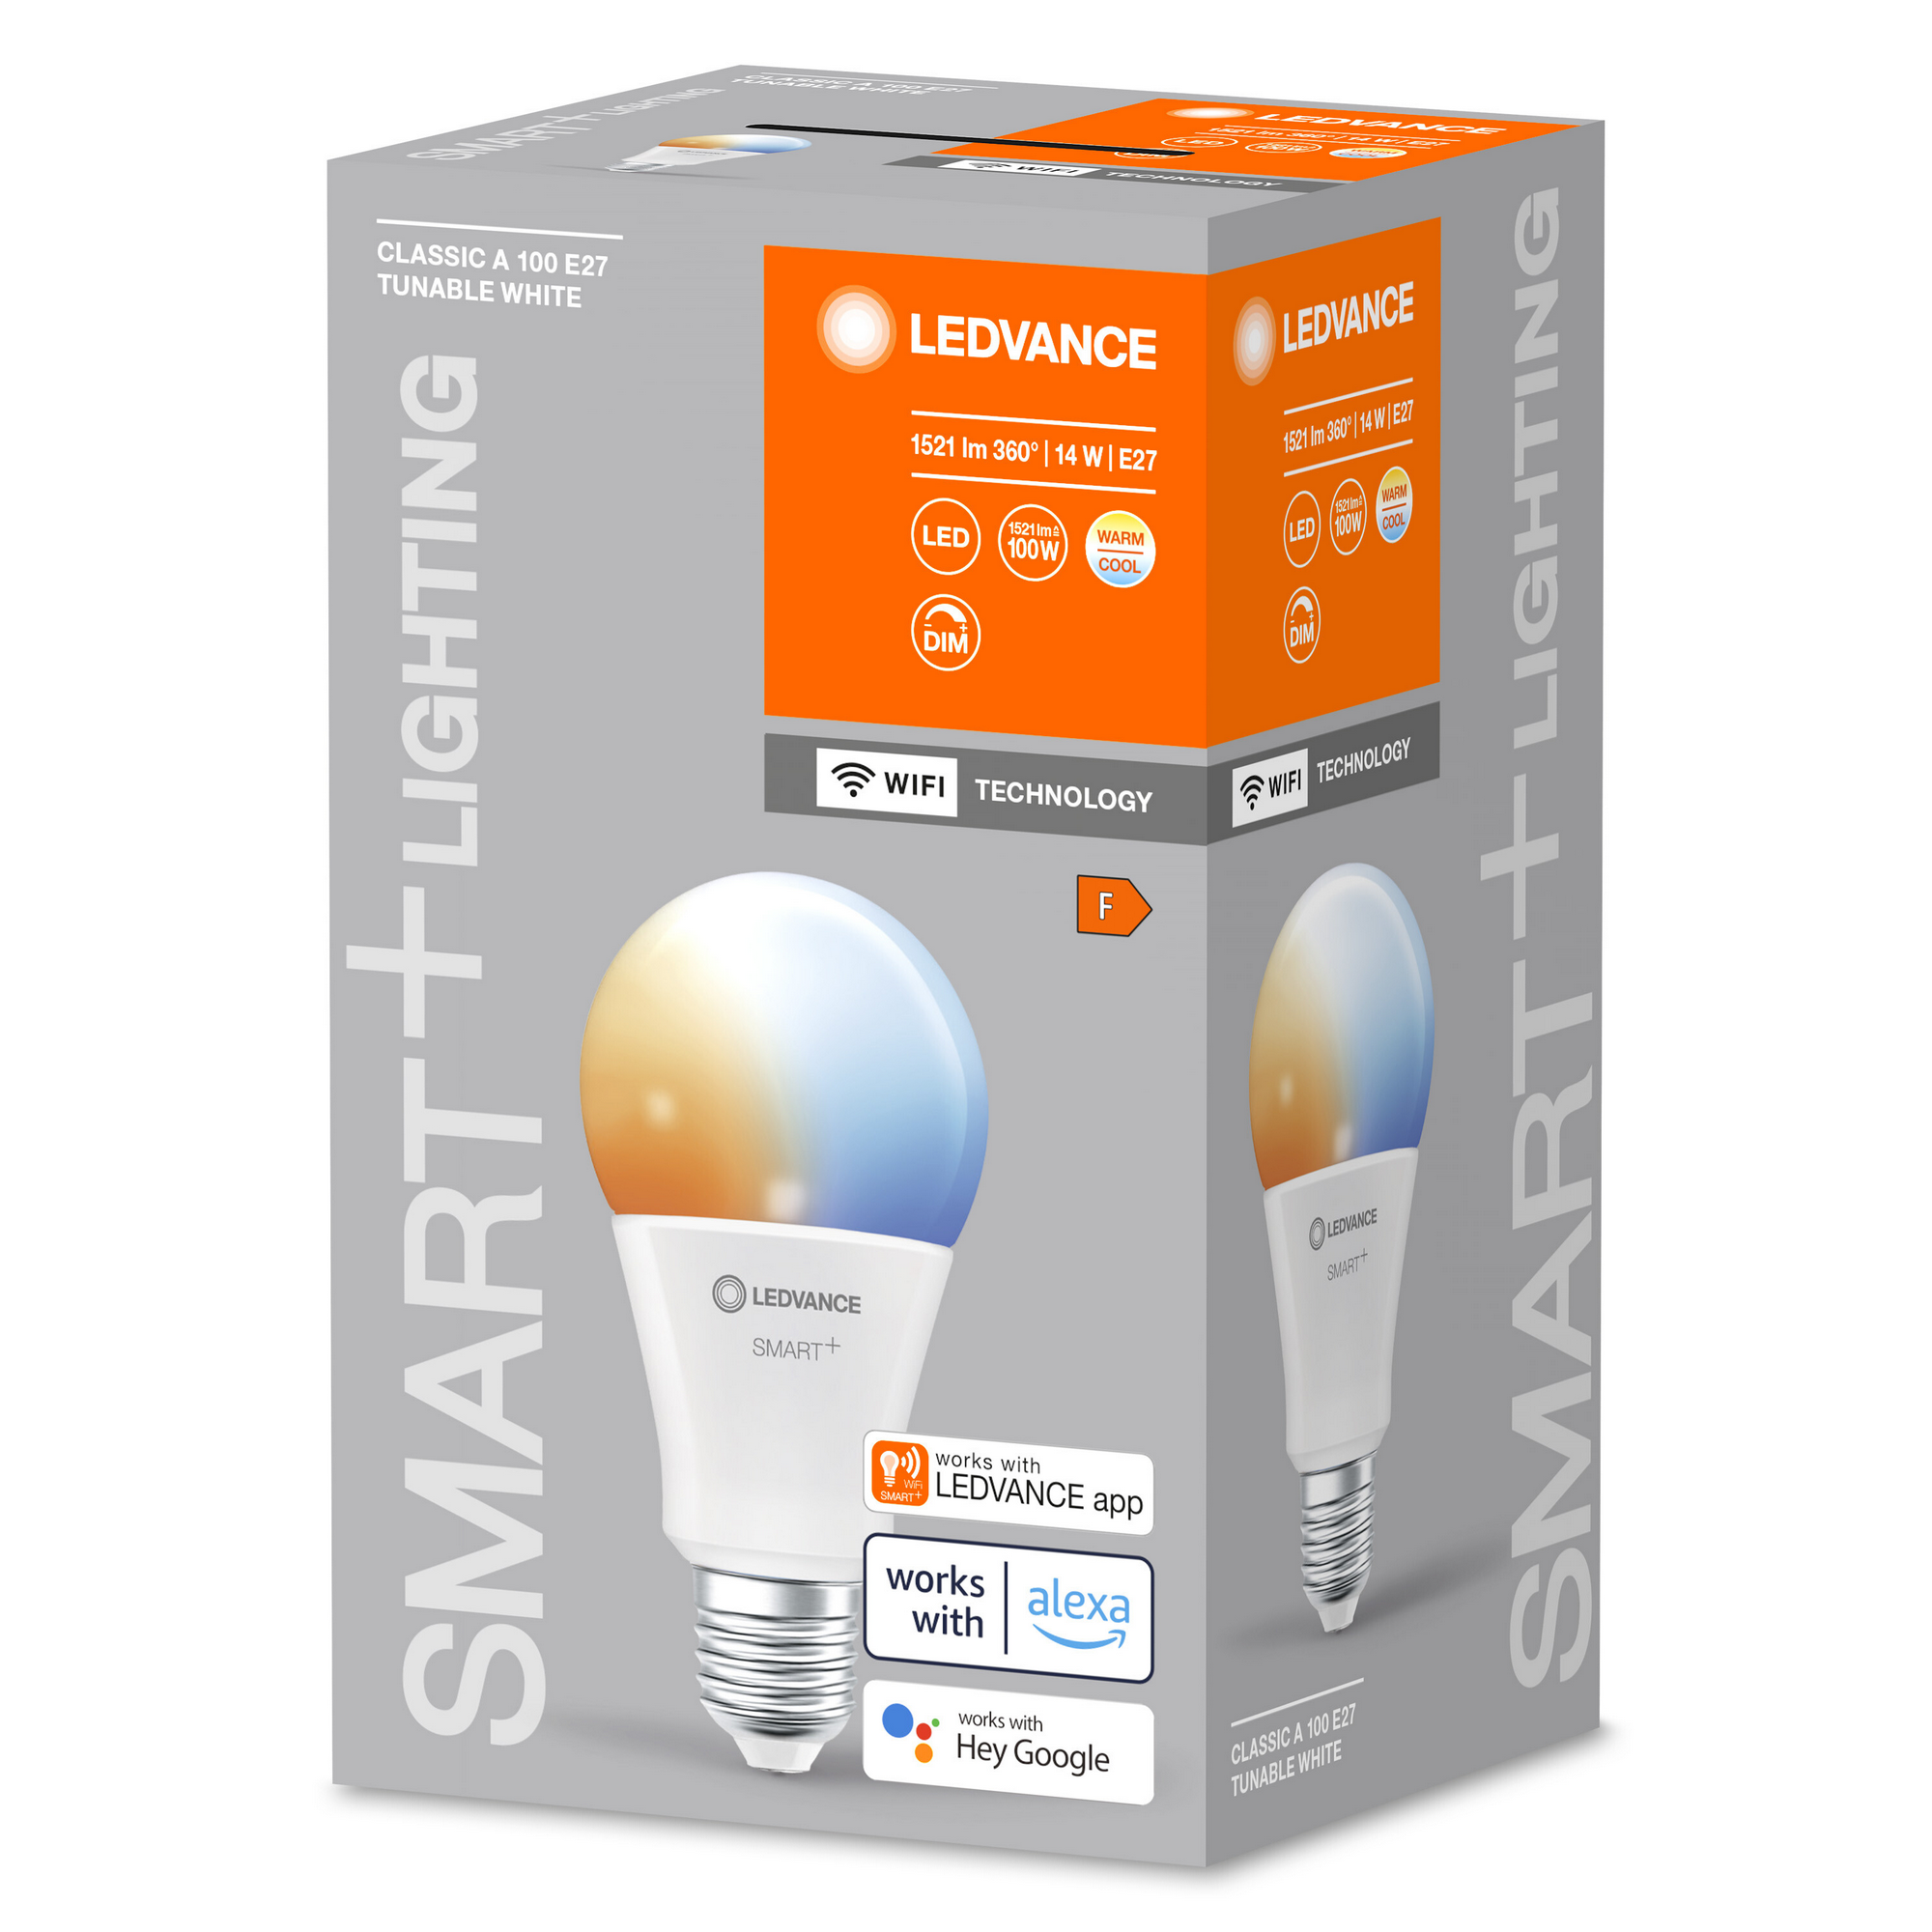 LED-Lampe 'Smart+ WiFi CLA' warm/kaltweis 14 W E27 1521 lm, dimmbar + product picture